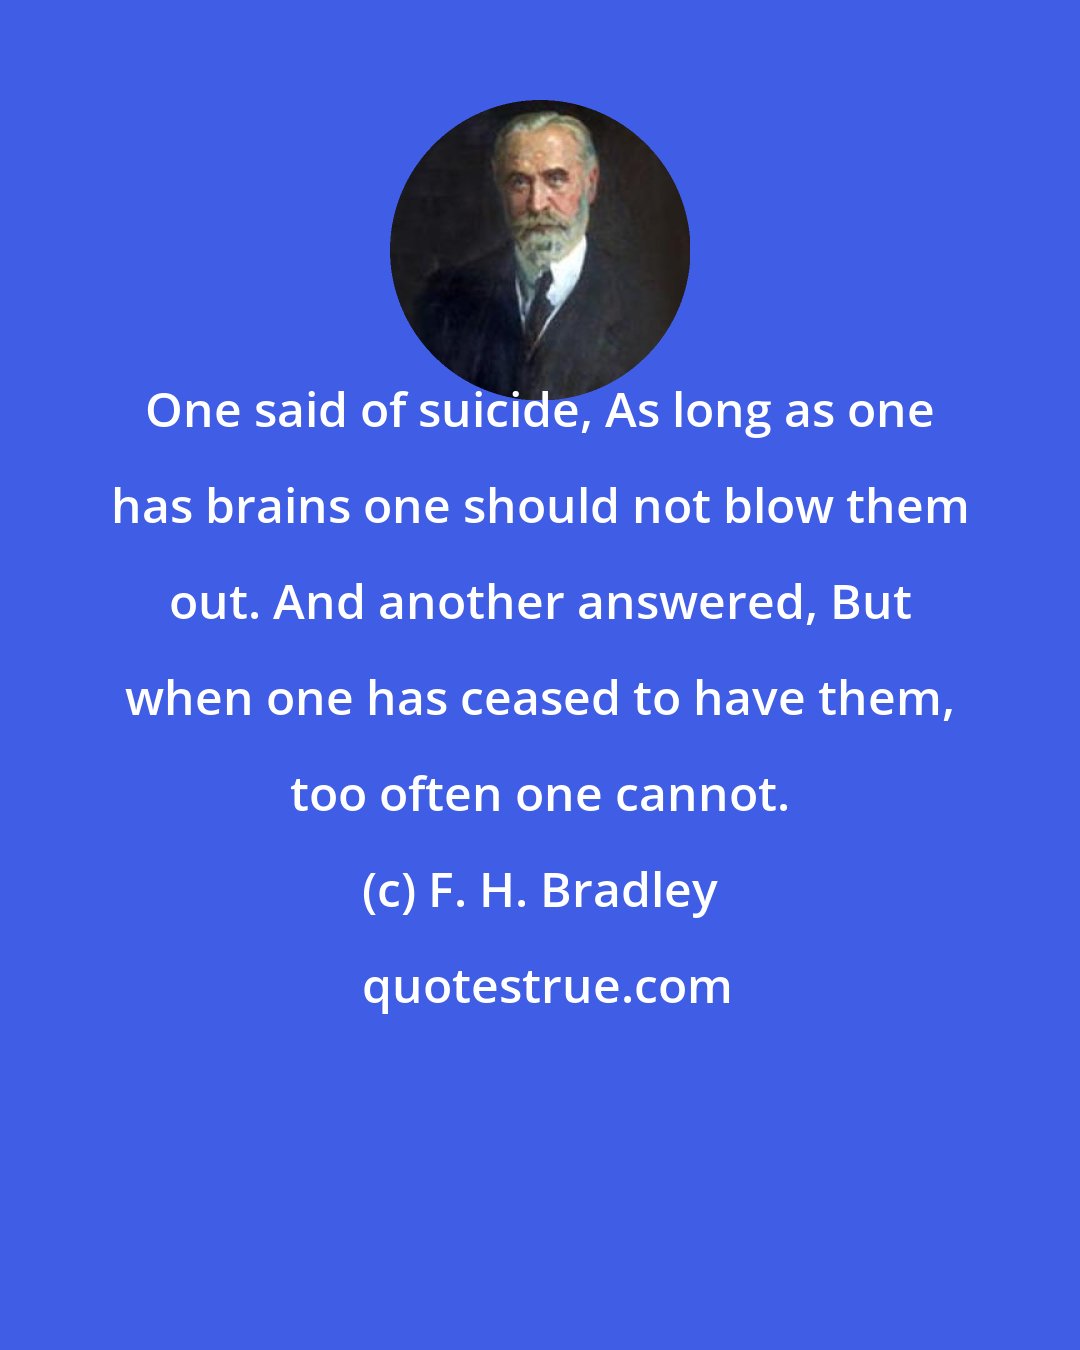 F. H. Bradley: One said of suicide, As long as one has brains one should not blow them out. And another answered, But when one has ceased to have them, too often one cannot.